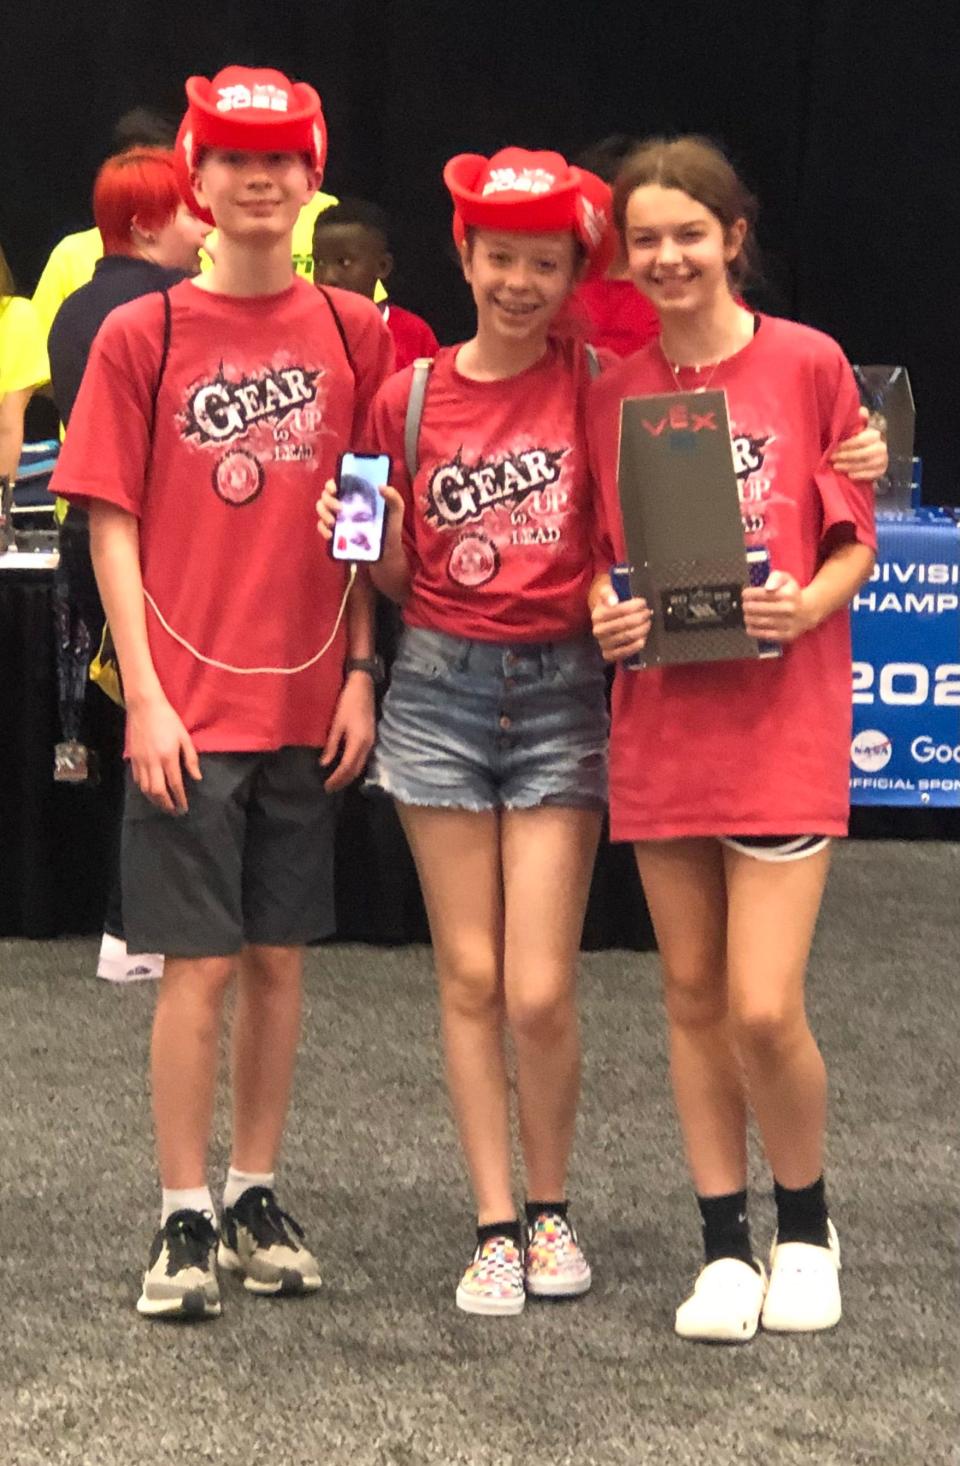 Reagan Tway, Jakob Adams, Macey Harper and Lucy Johnston, better known as Team 2281X or "GMS Star Lord," won the Design Award in their division.